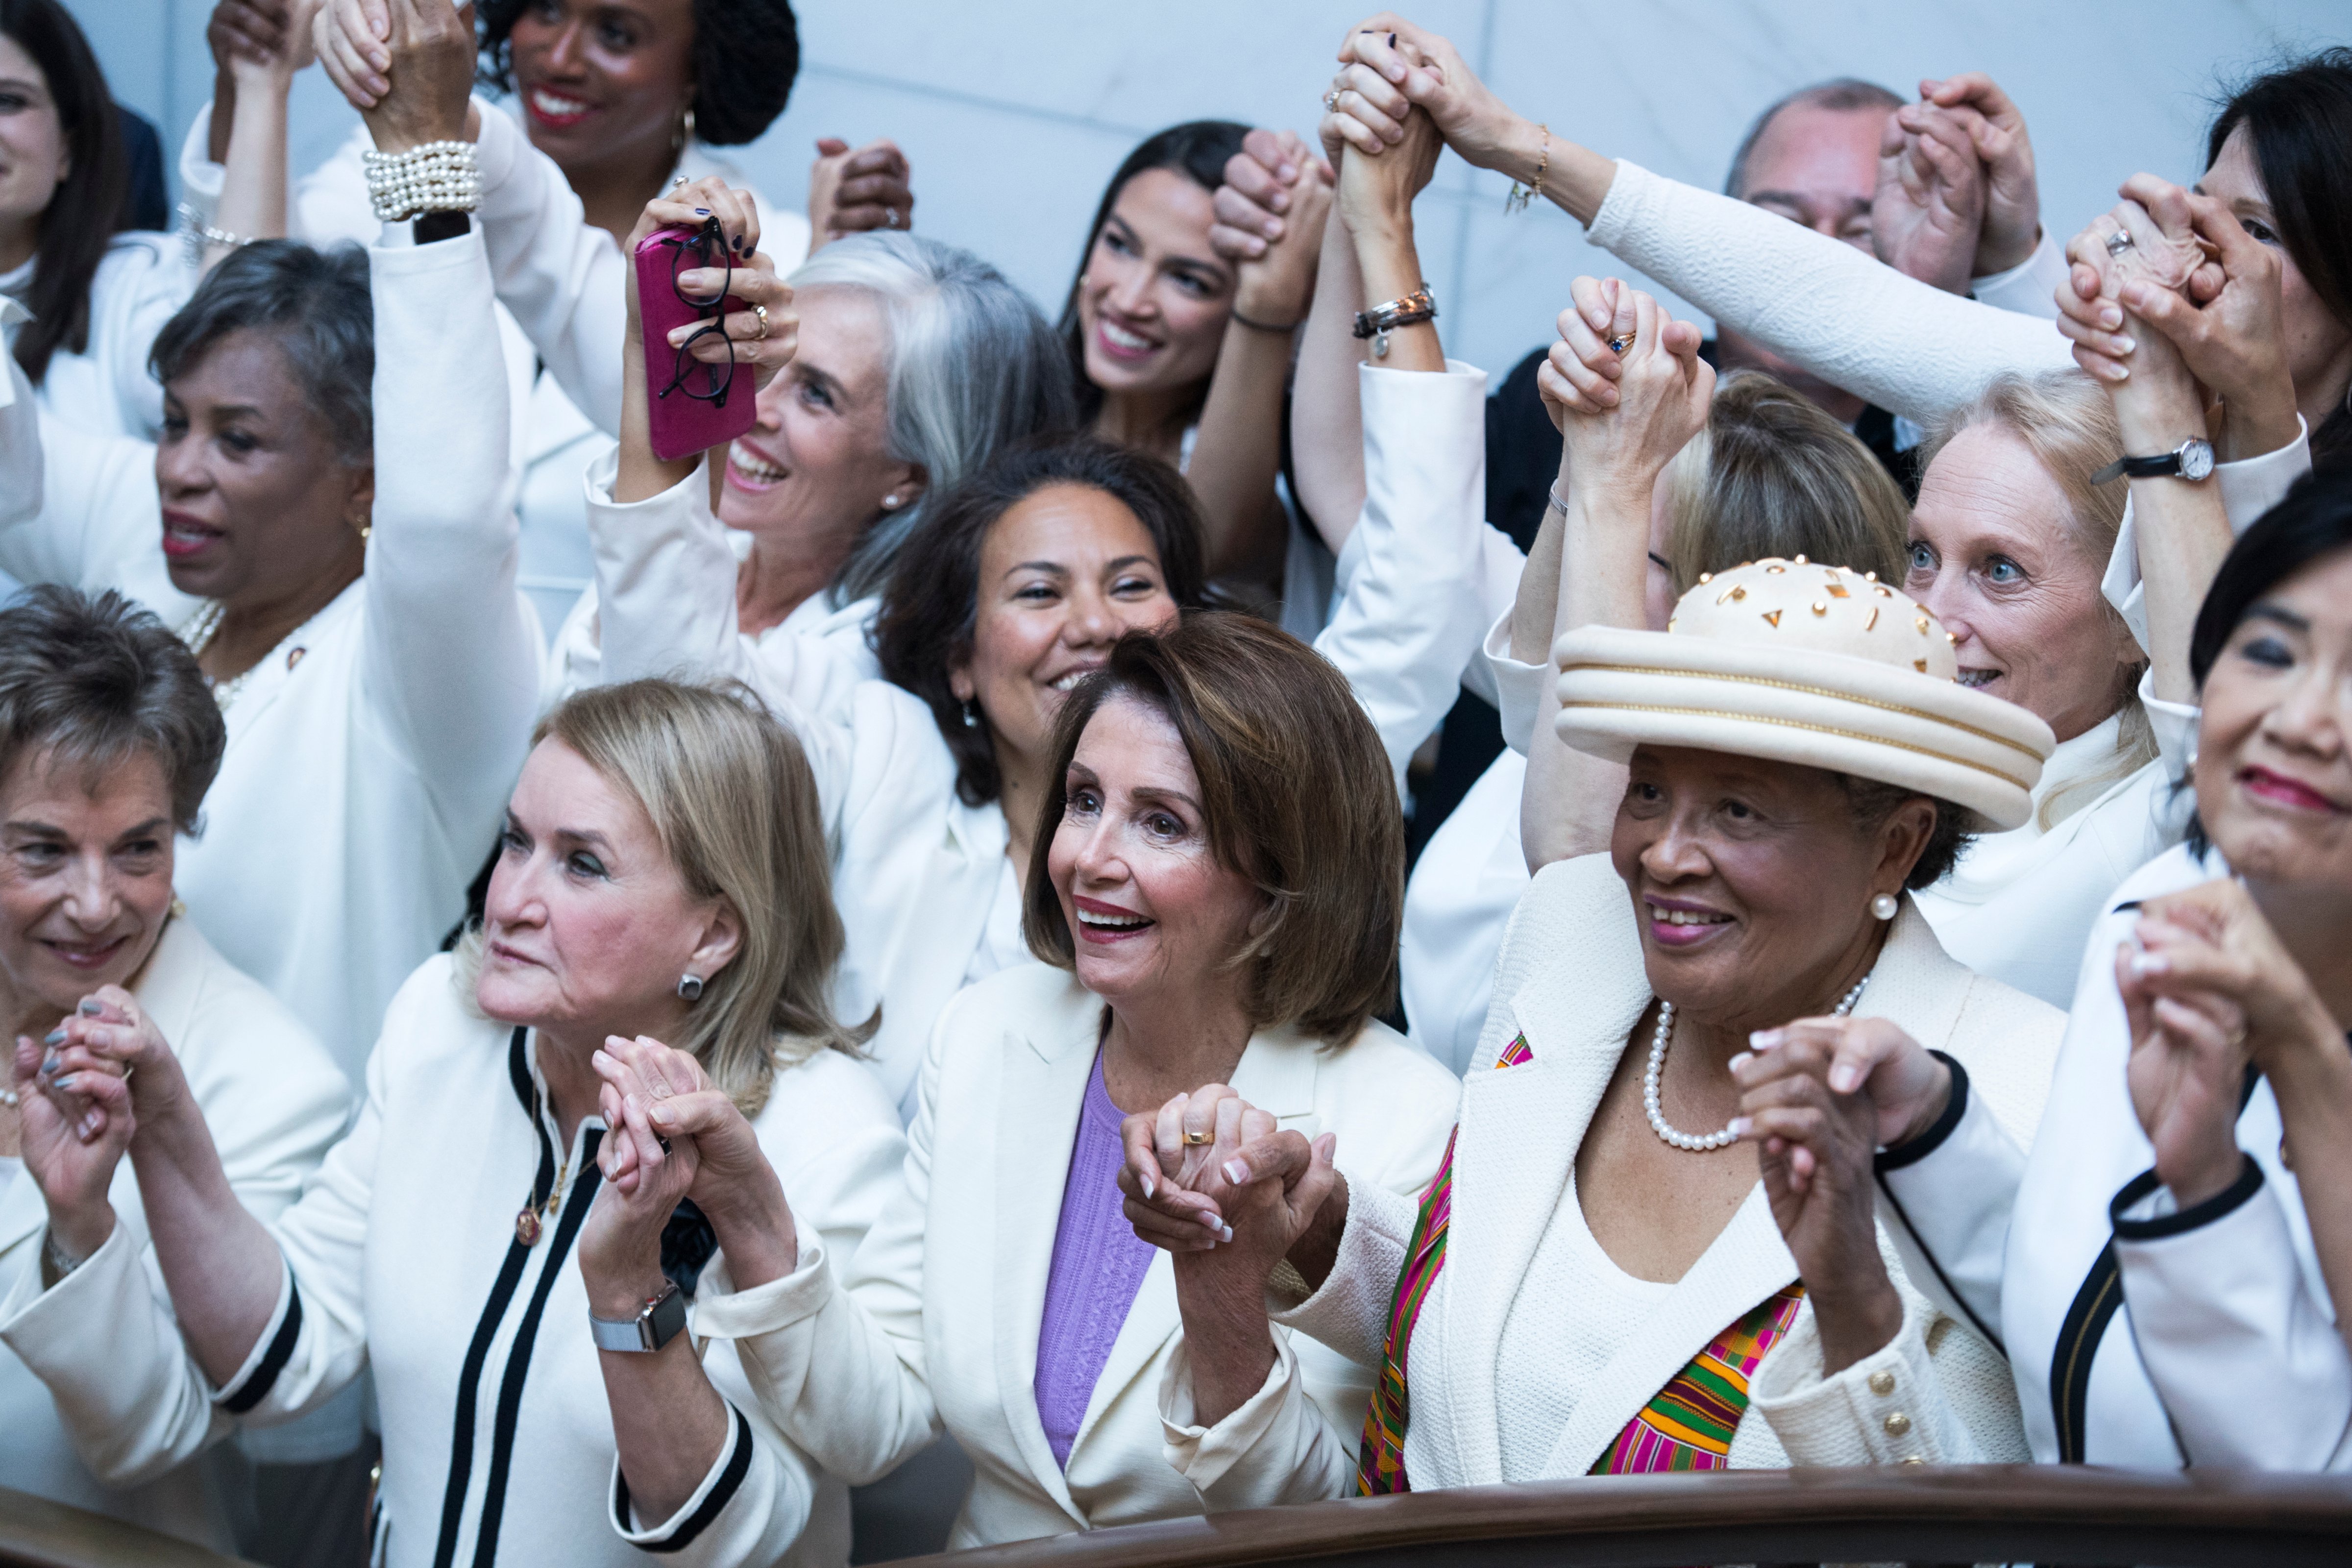 Reps. Jan Schakowsky, D-Ill., Sylvia Garcia, D-Texas, Speaker Nancy Pelosi, D-Calif., and Alma Adams, D-N.C., wore "suffragette white" to the State of the Union address to show solidarity for women's agendas on Tuesday, Feb 5, 2019 in Washington, D.C. (Tom Williams—CQ Roll Call/Getty Images:)